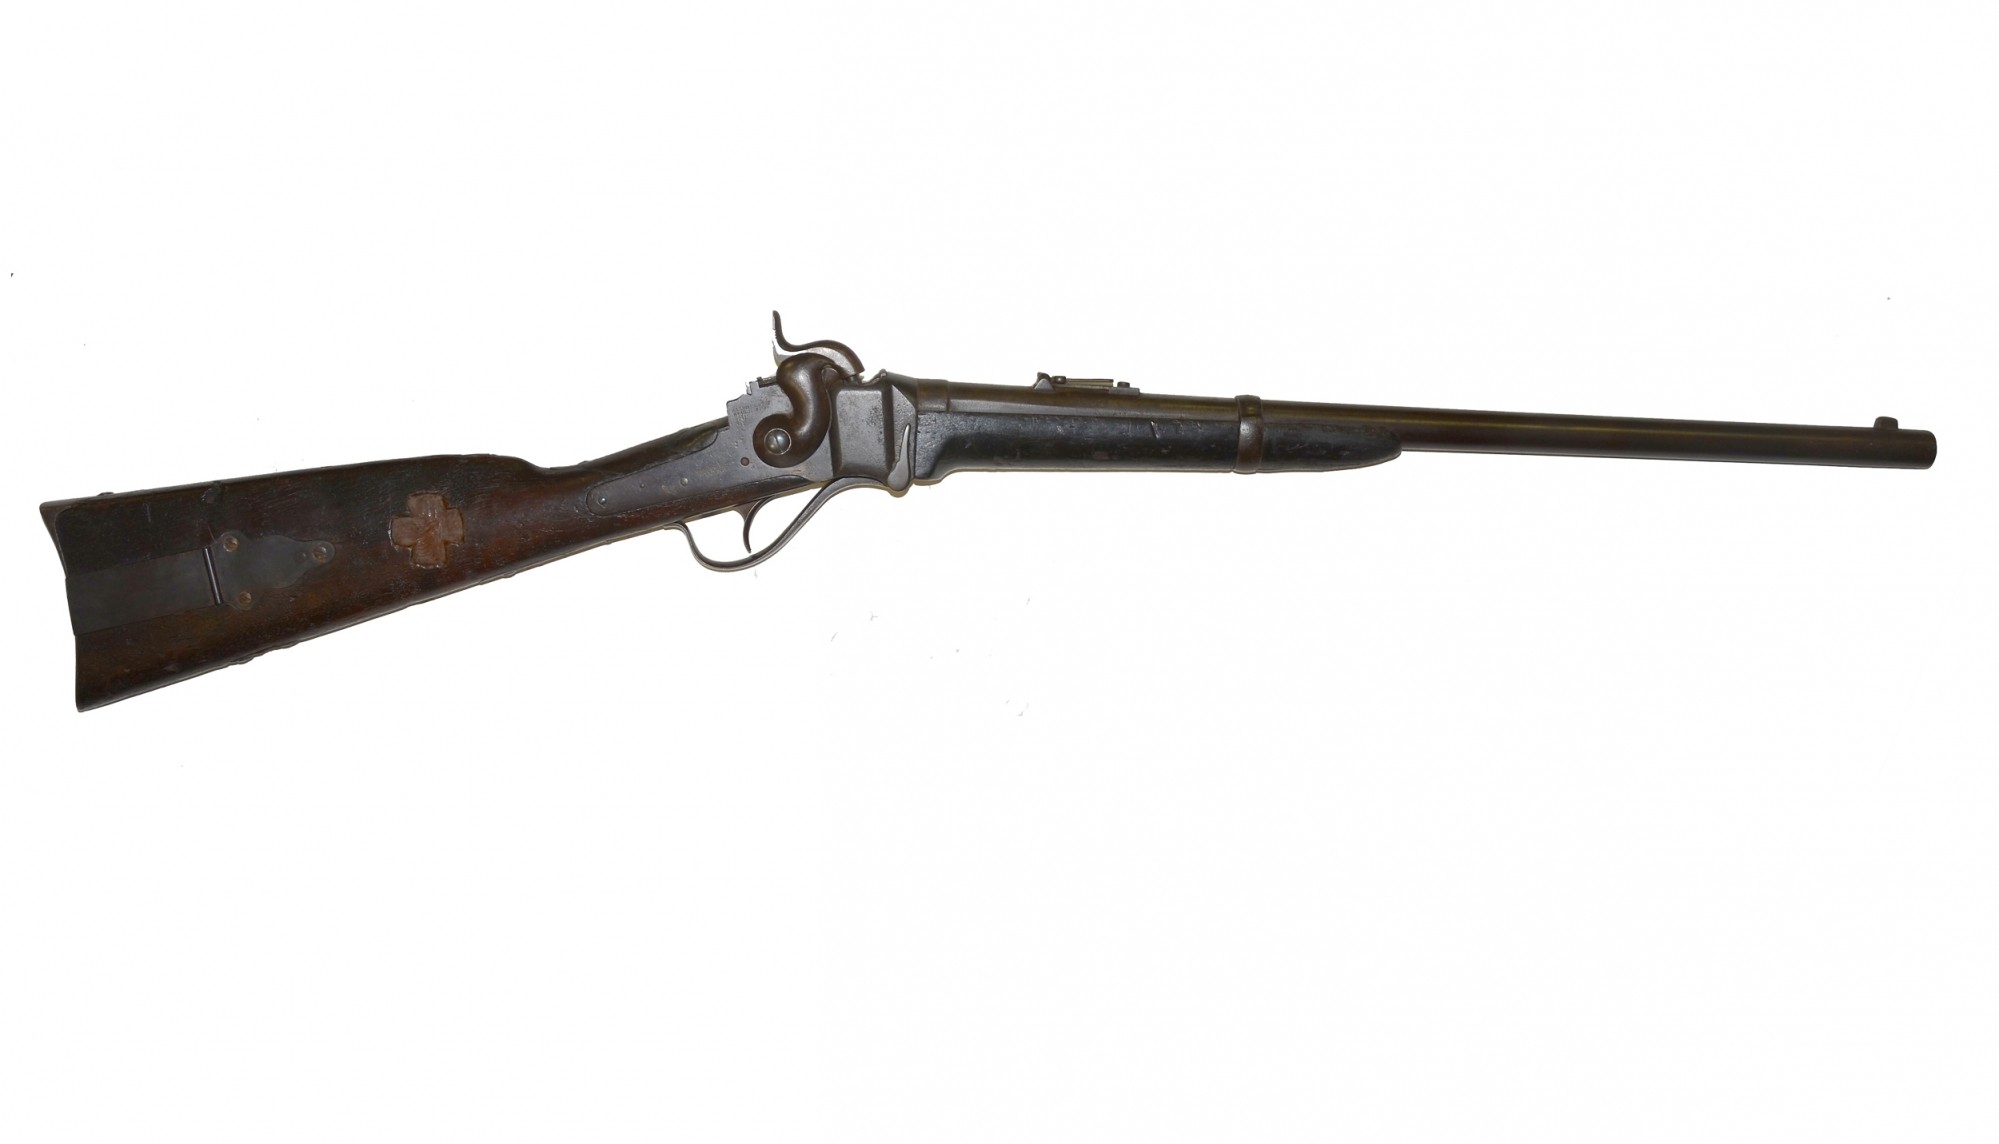 1859 sharps carbine serial numbers